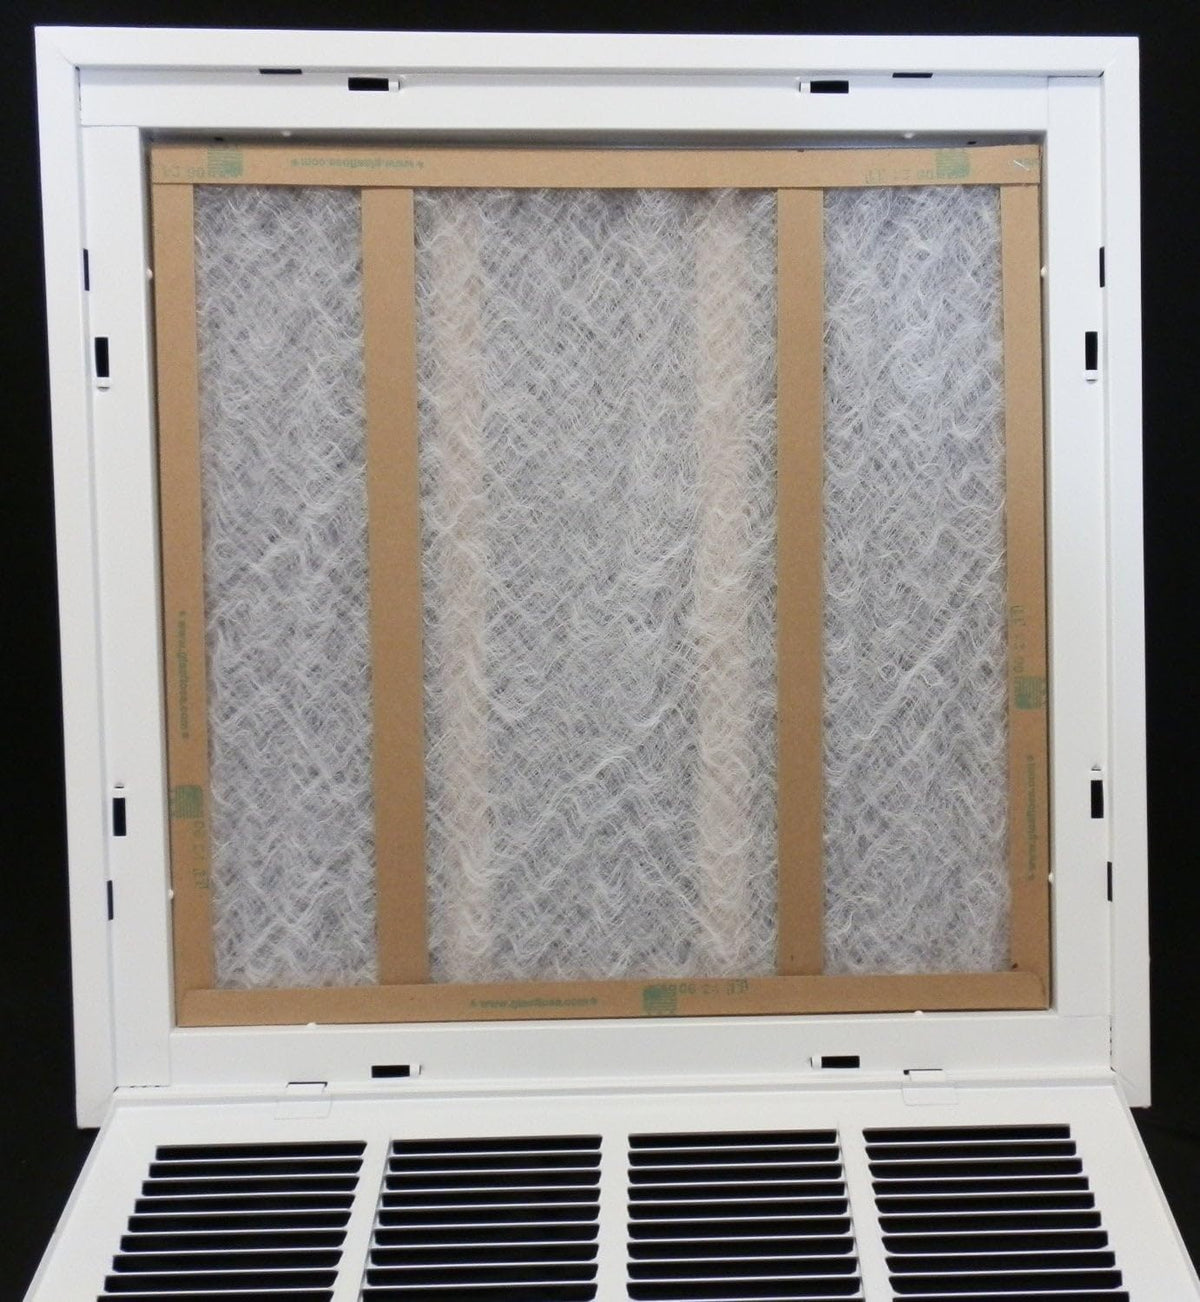 16&quot; X 16&quot; Steel Return Air Filter Grille for 1&quot; Filter - Removable Frame - [Outer Dimensions: 18 5/8&quot; X 18 5/8&quot;]